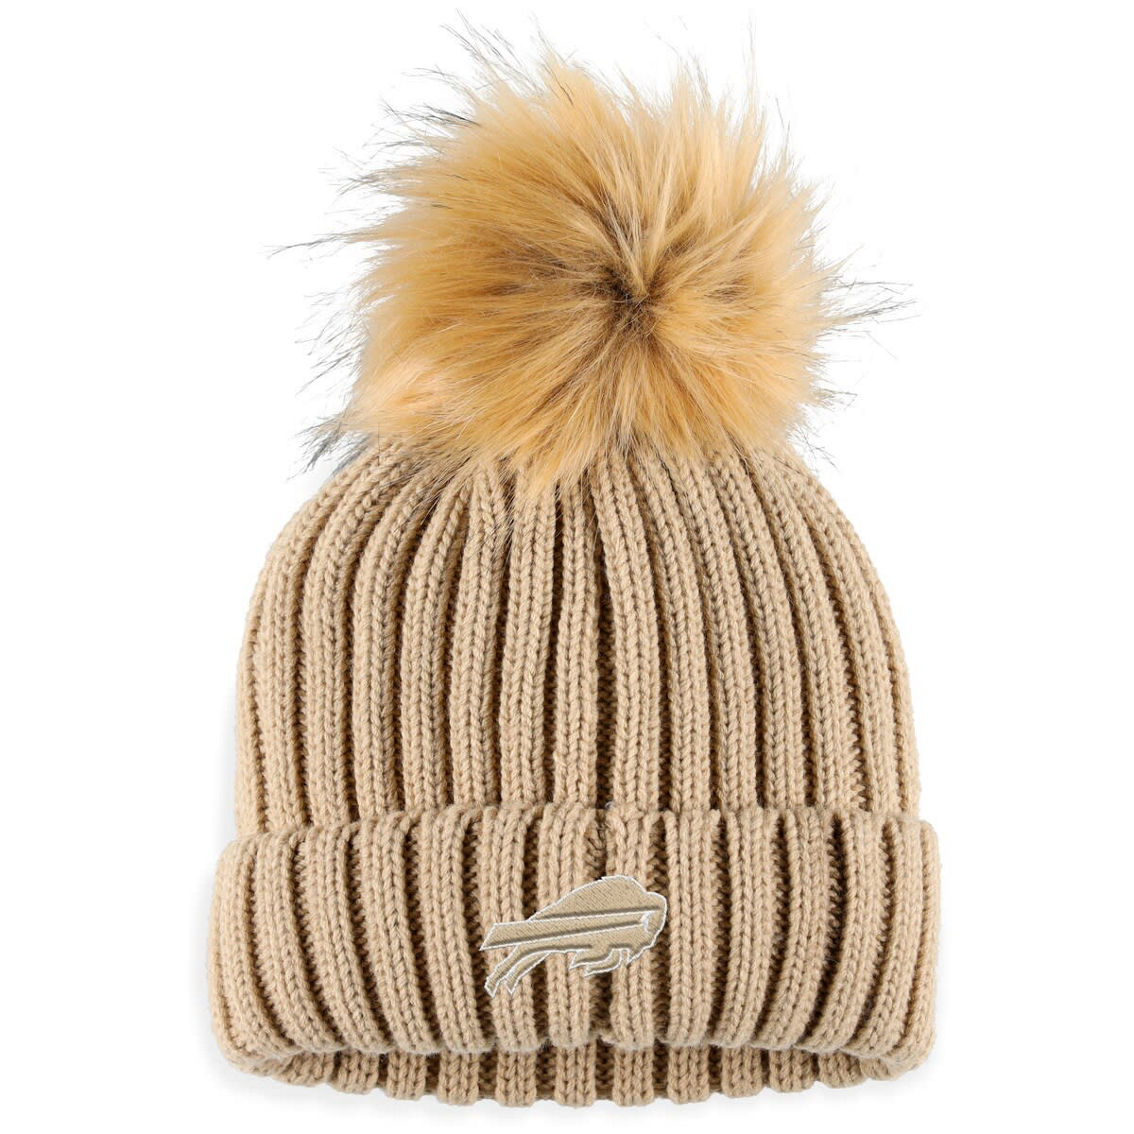 WEAR by Erin Andrews Women's Natural Buffalo Bills Neutral Cuffed Knit Hat with Pom